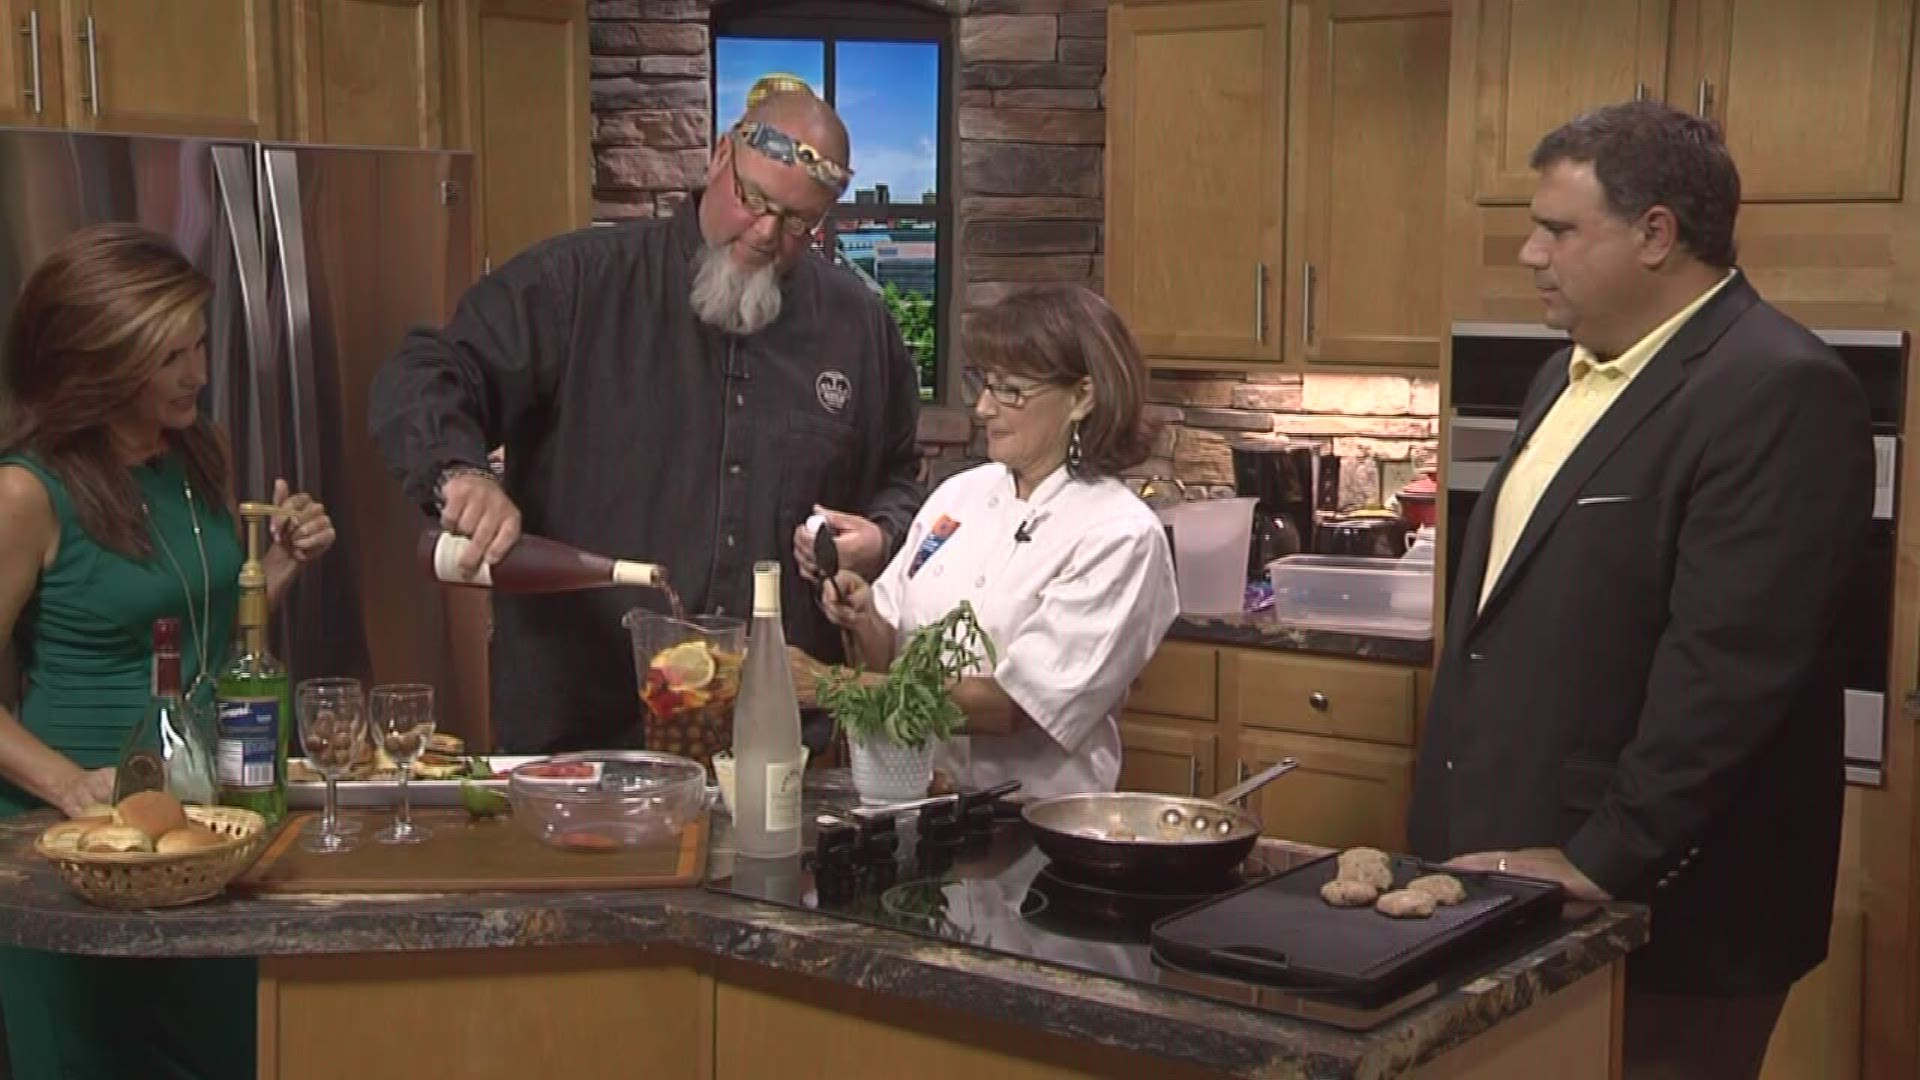 JD Dalton from Tsali Notch and Terri Geiser share recipes using Tsali Notch wine - perfect for before and after the eclipse.